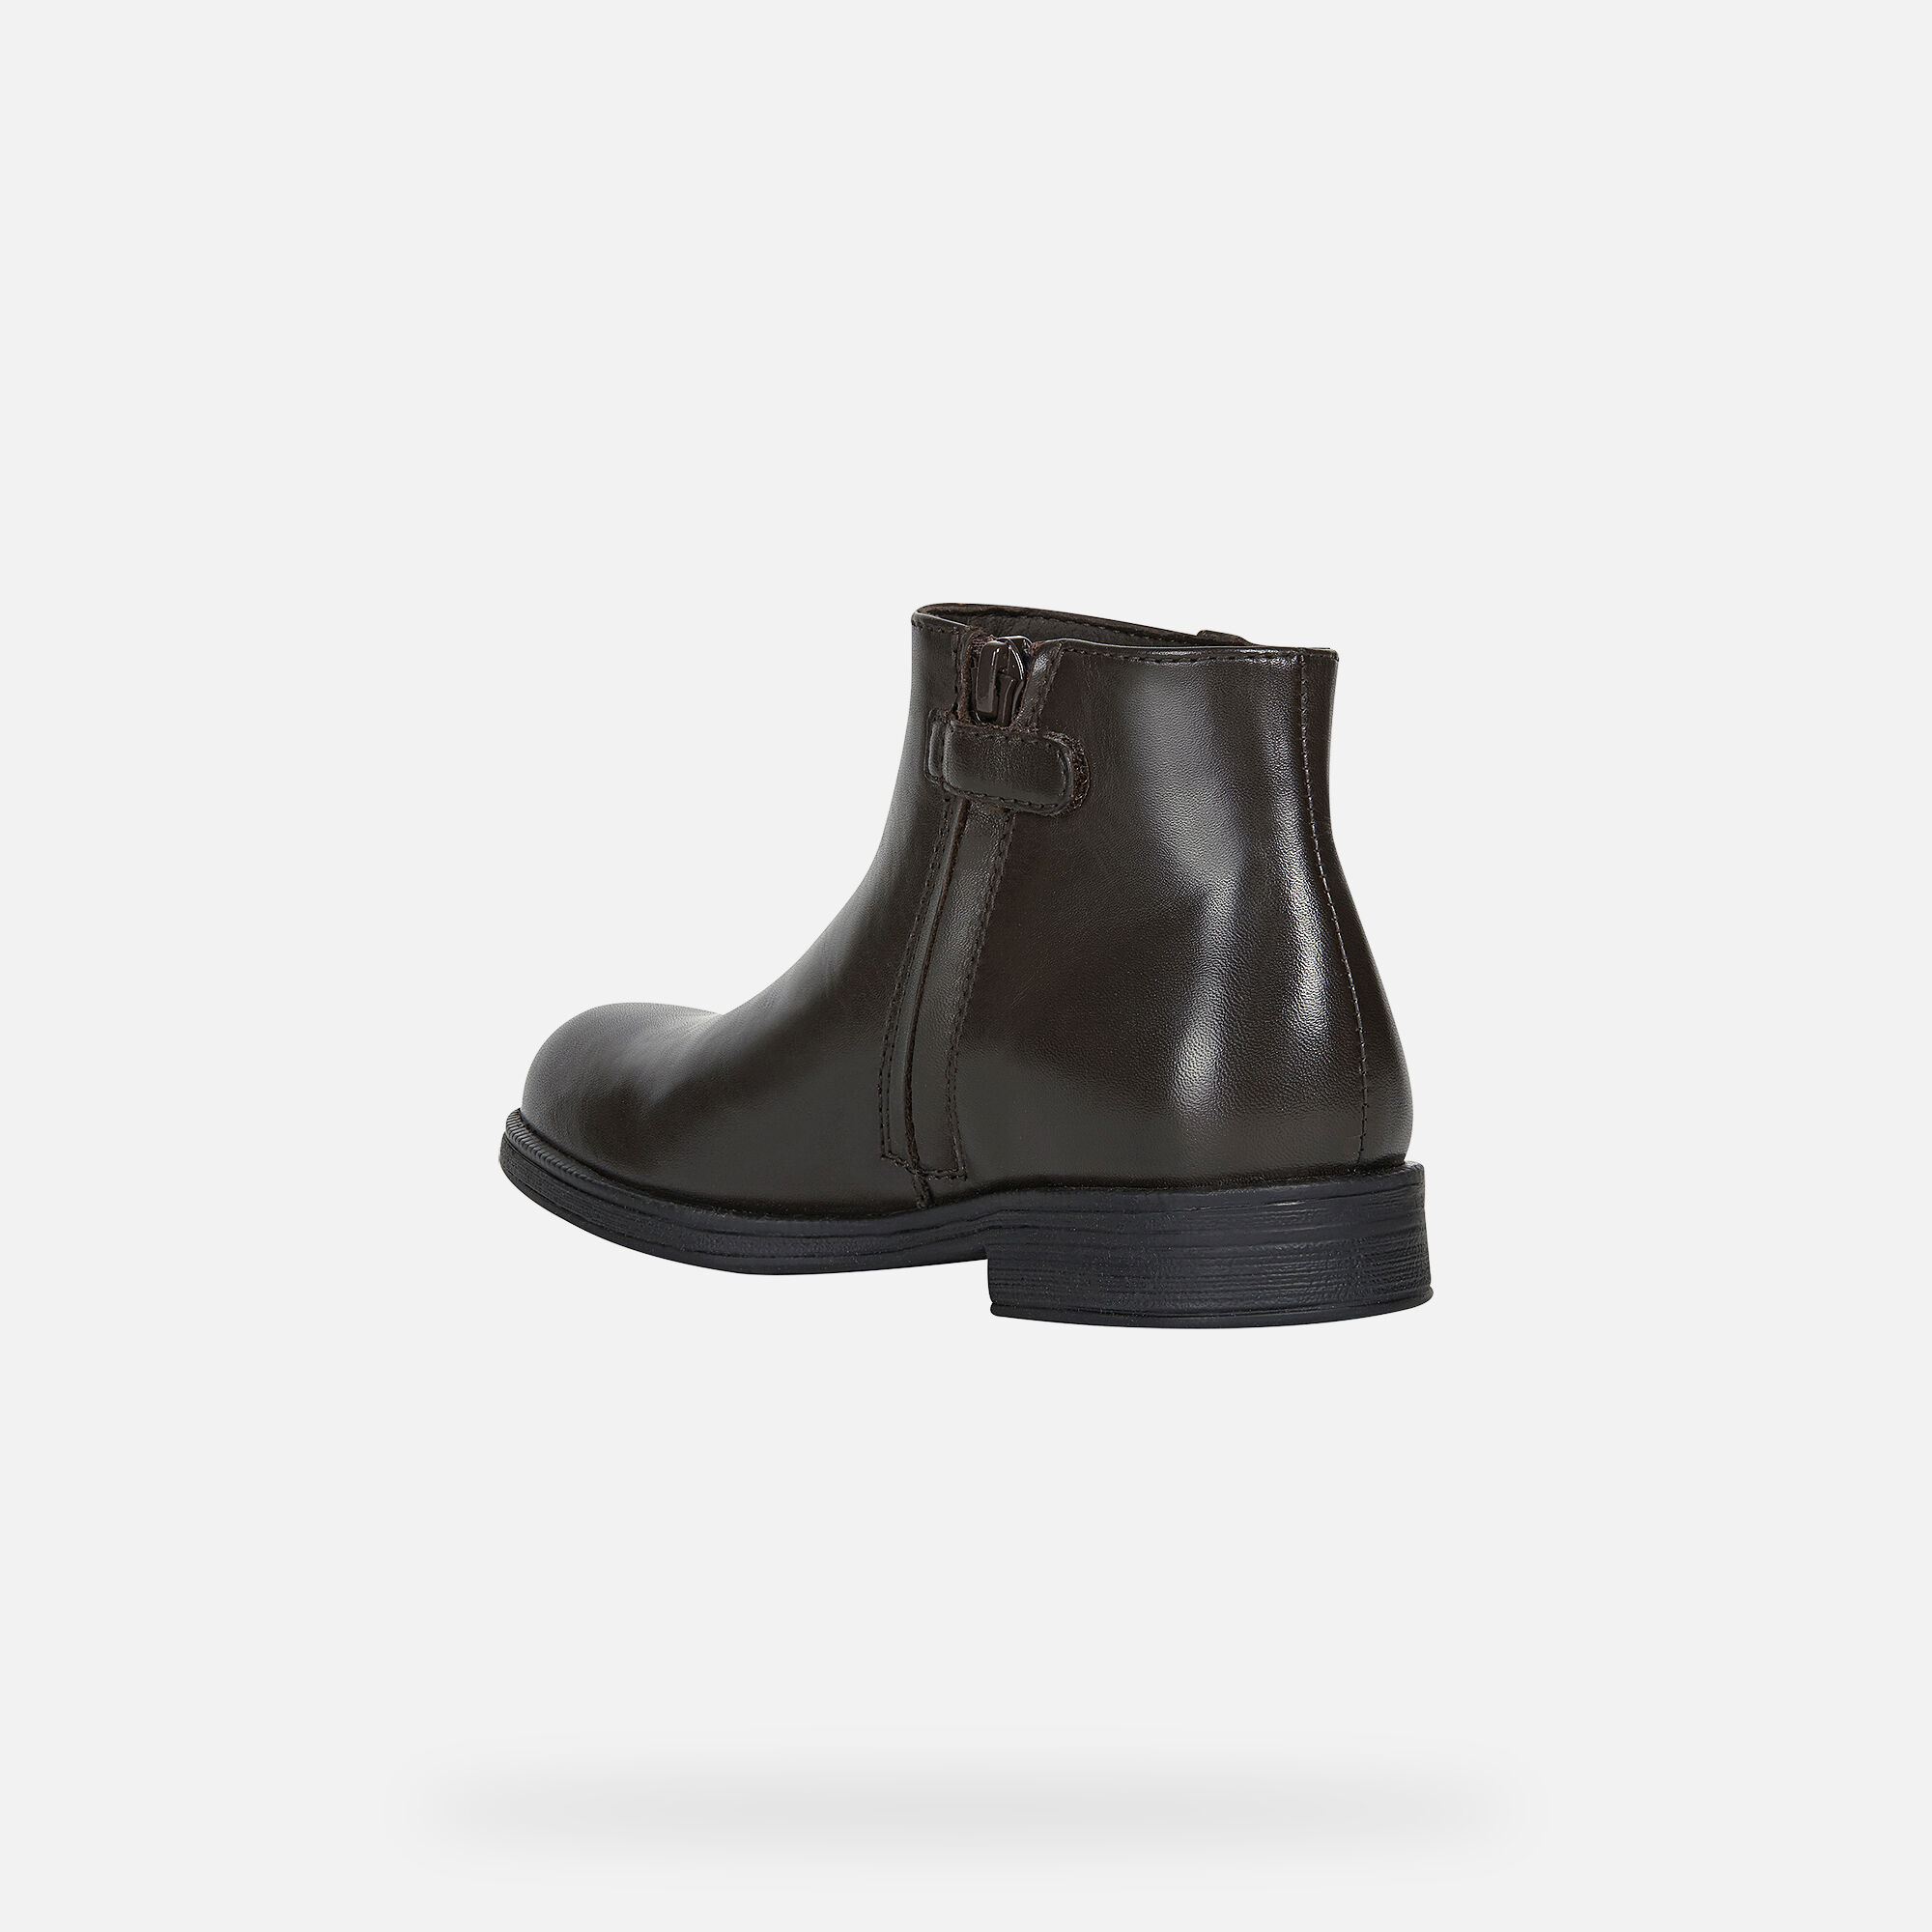 AGATA GIRL - ANKLE BOOTS from girls | Geox